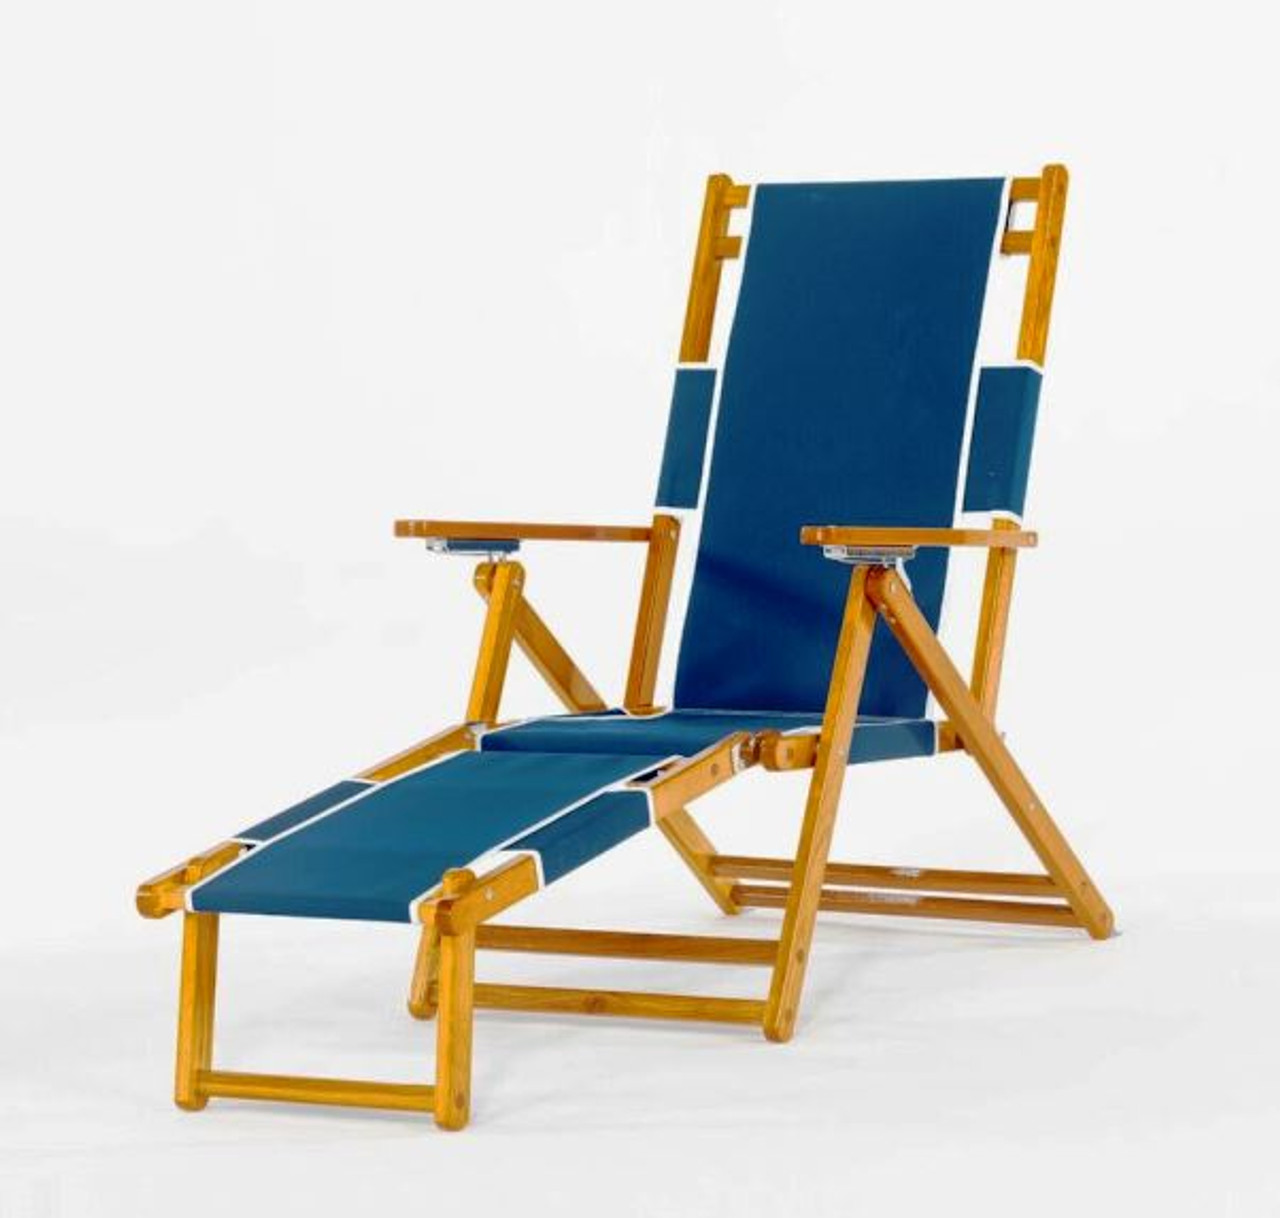 Commercial Wooden Beach Chairs - Foot Rest